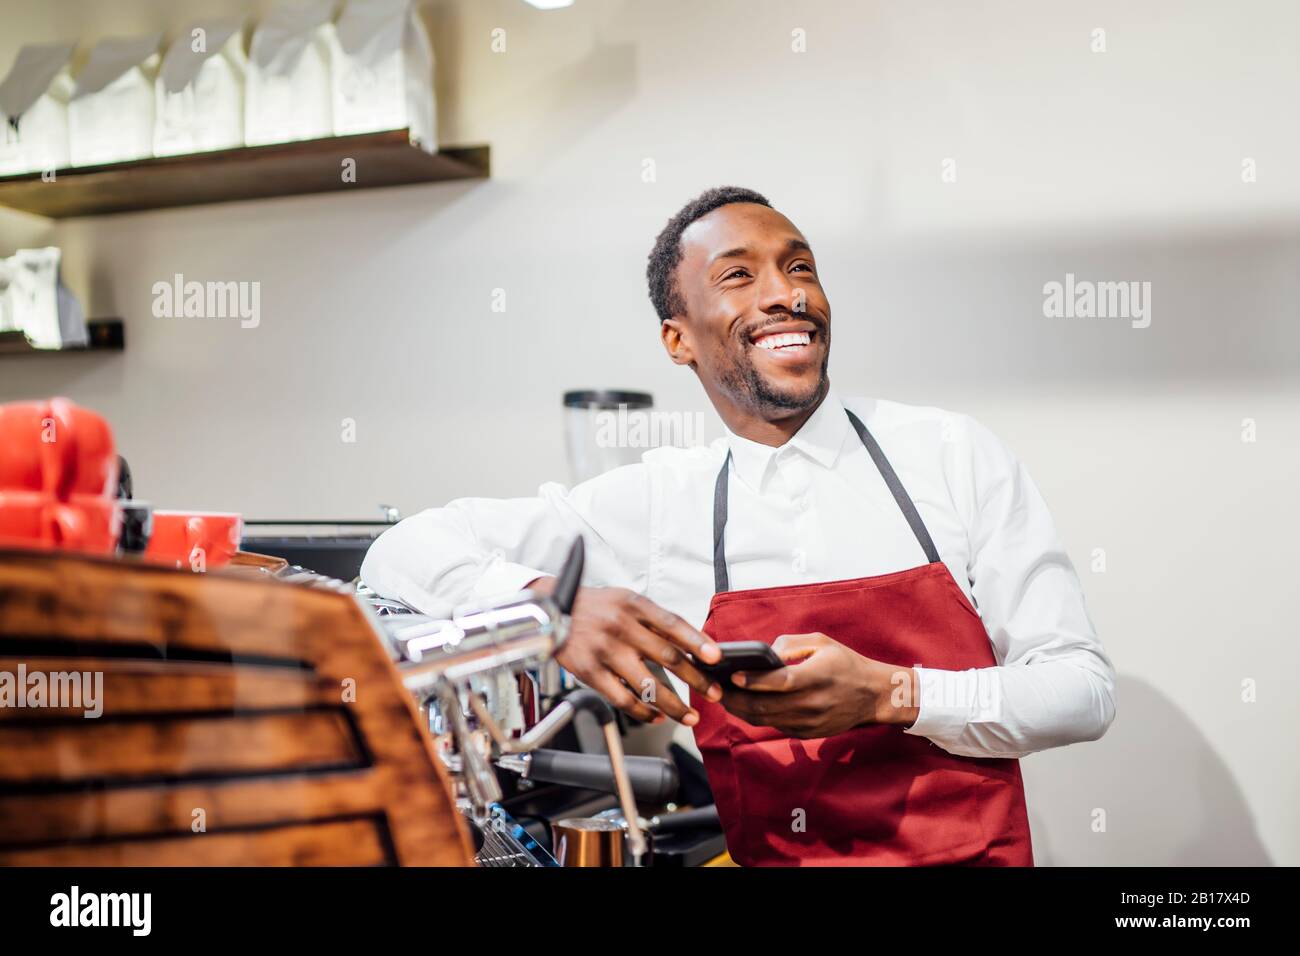 Happy barista holding cell phone in a coffee shop Stock Photo